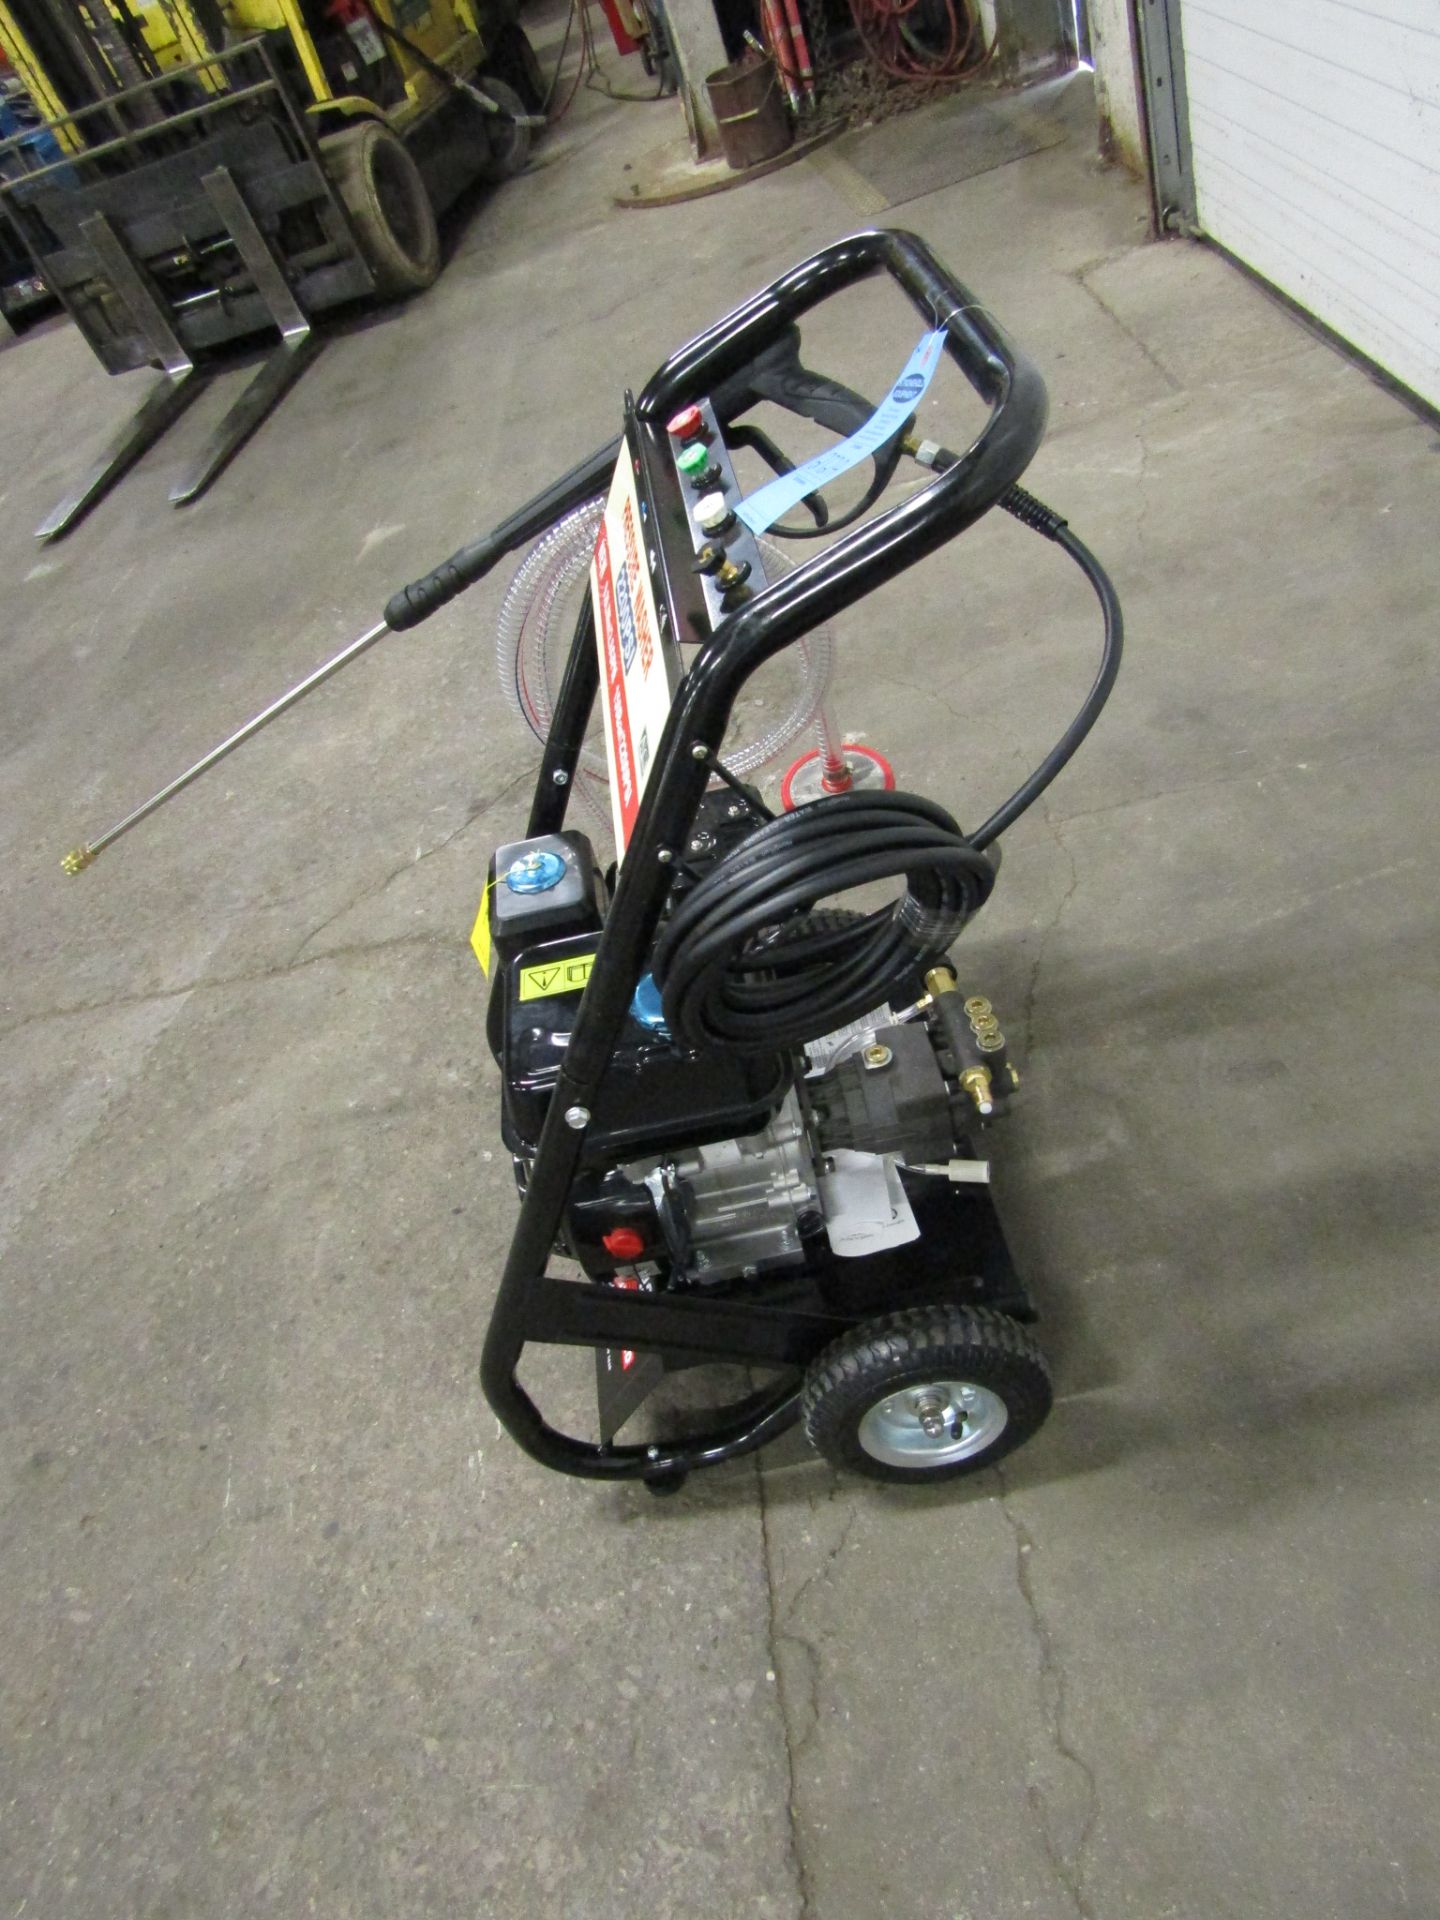 Brand New Pressure Power Washer - Gas Powered Unit 2200PSI - Variable Speed 2.0GPM with various - Image 3 of 3